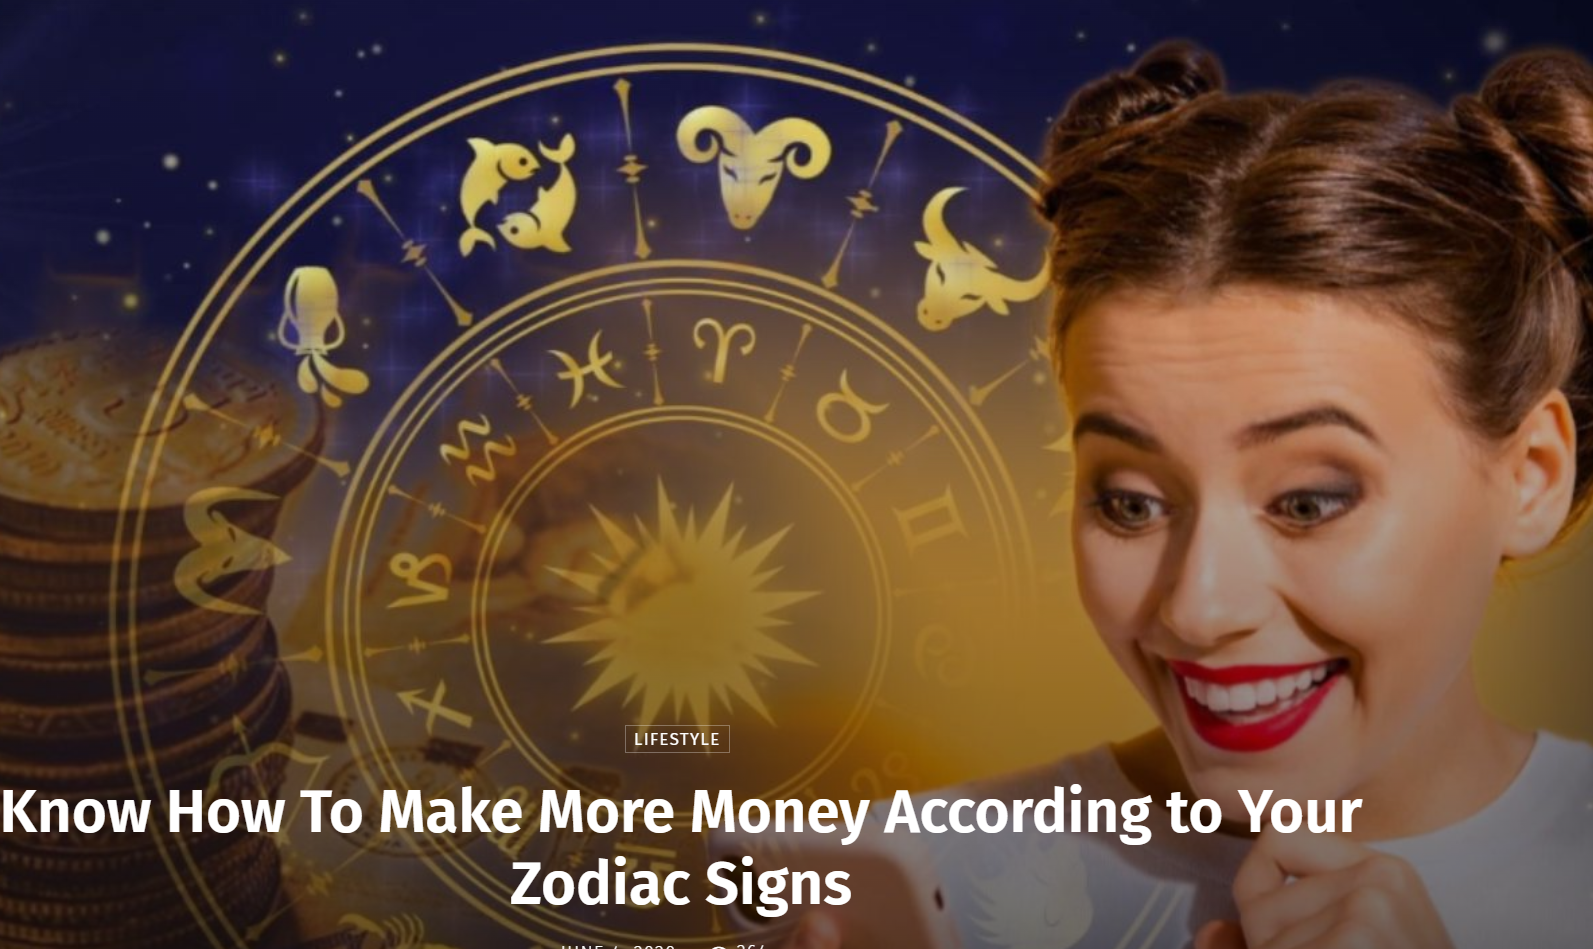 Simple Tips to Earn More Money in 2022 Base on Your Zodiac Sign